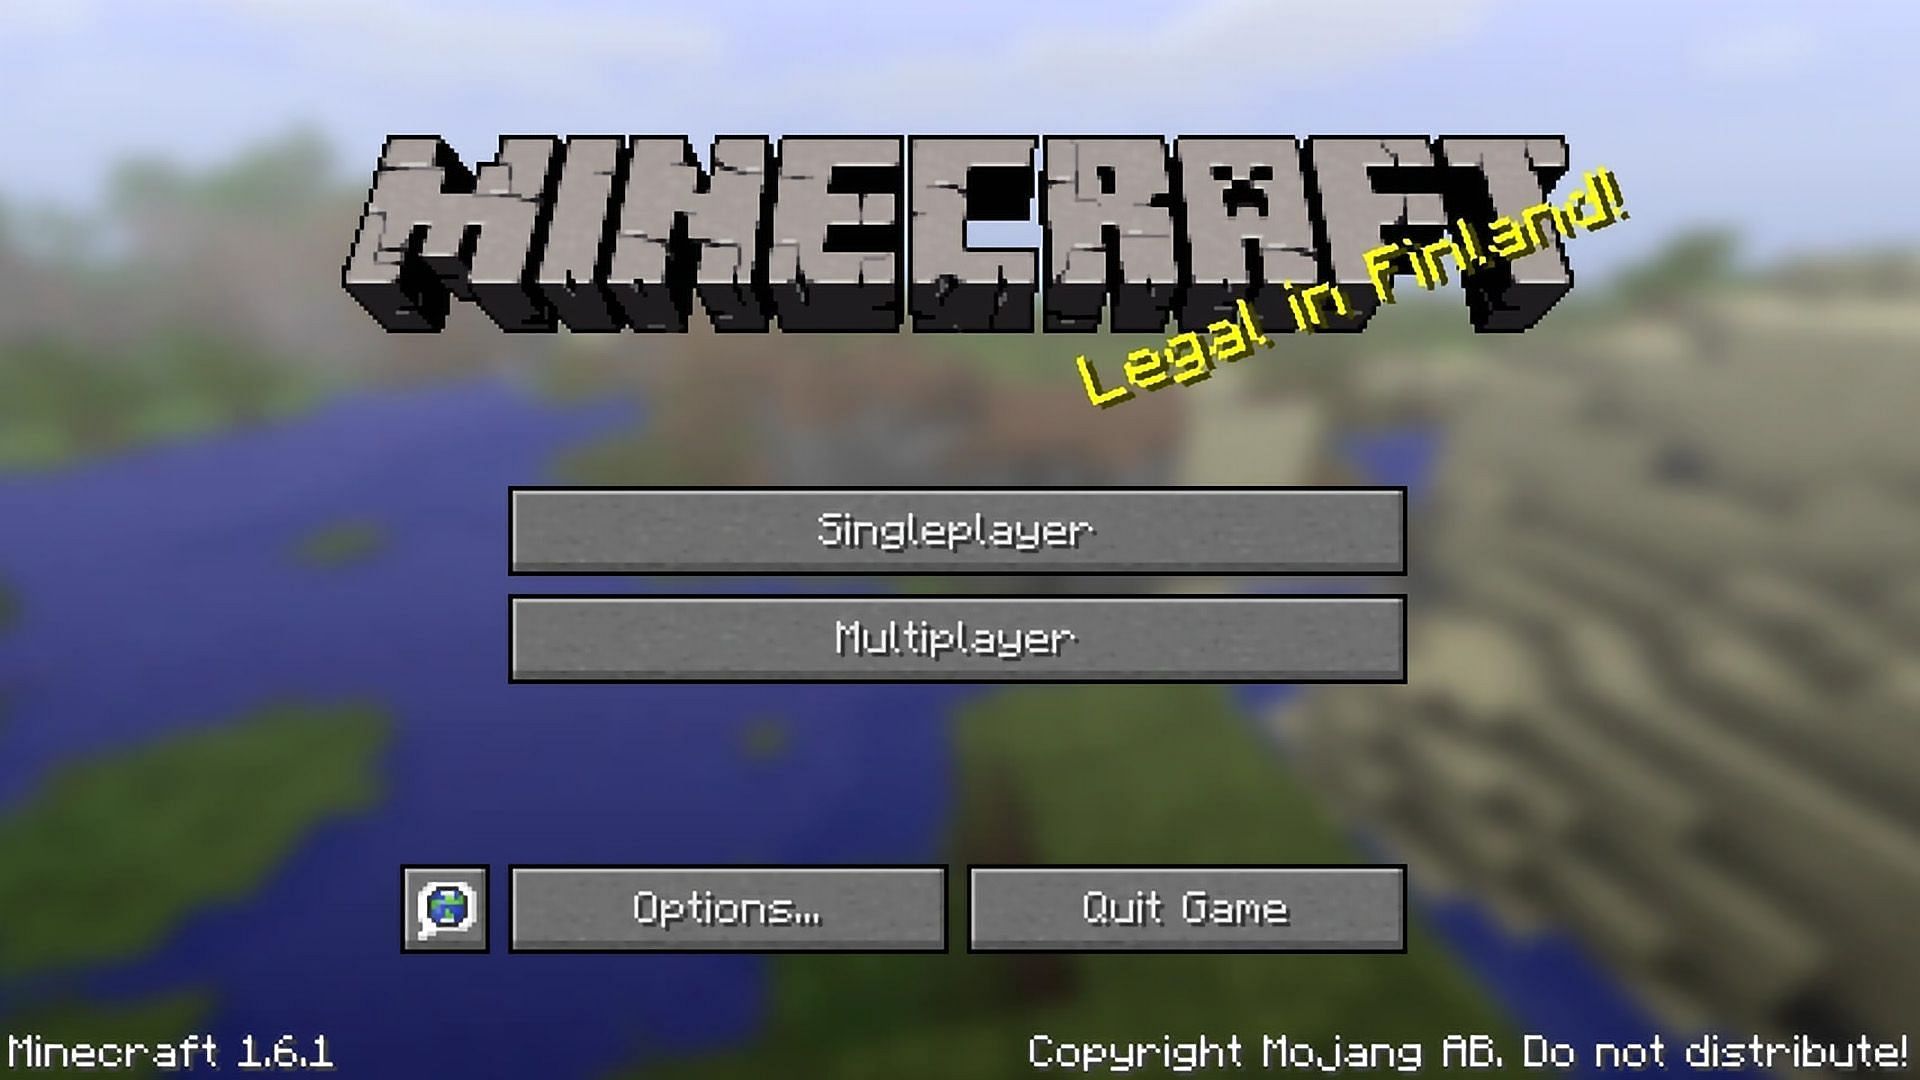 Resource pack was introduced in the 1.6.1 version (Image via Minecraft.fandom)